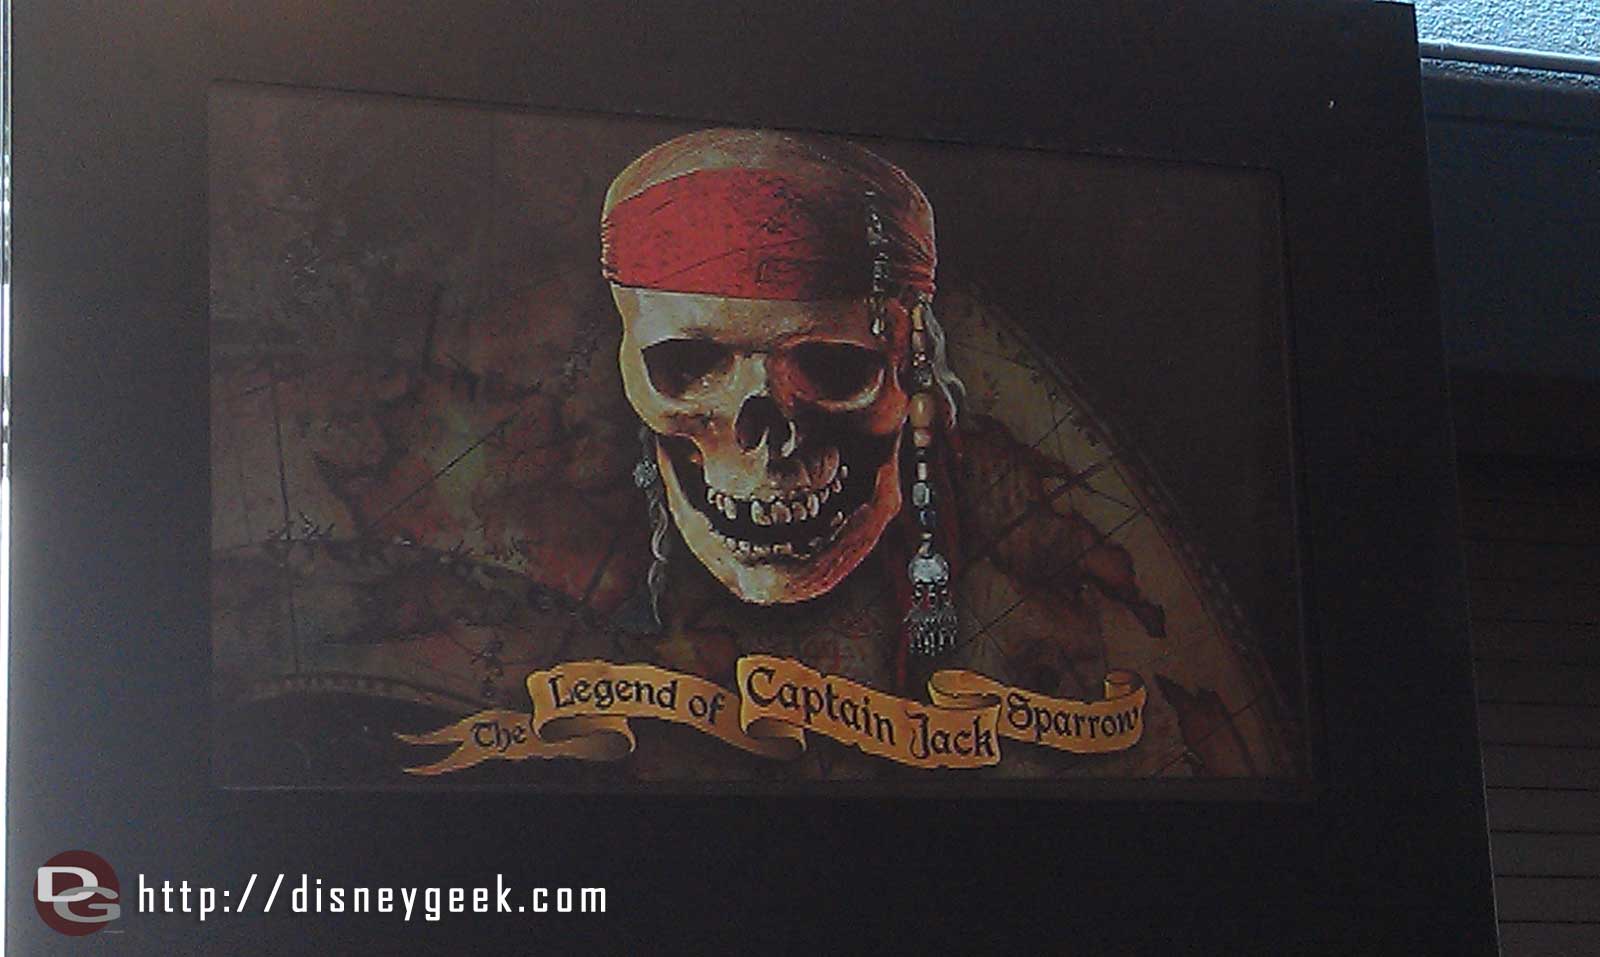 The Legend of Jack Sparrow is open this time by so in linevto give it a try